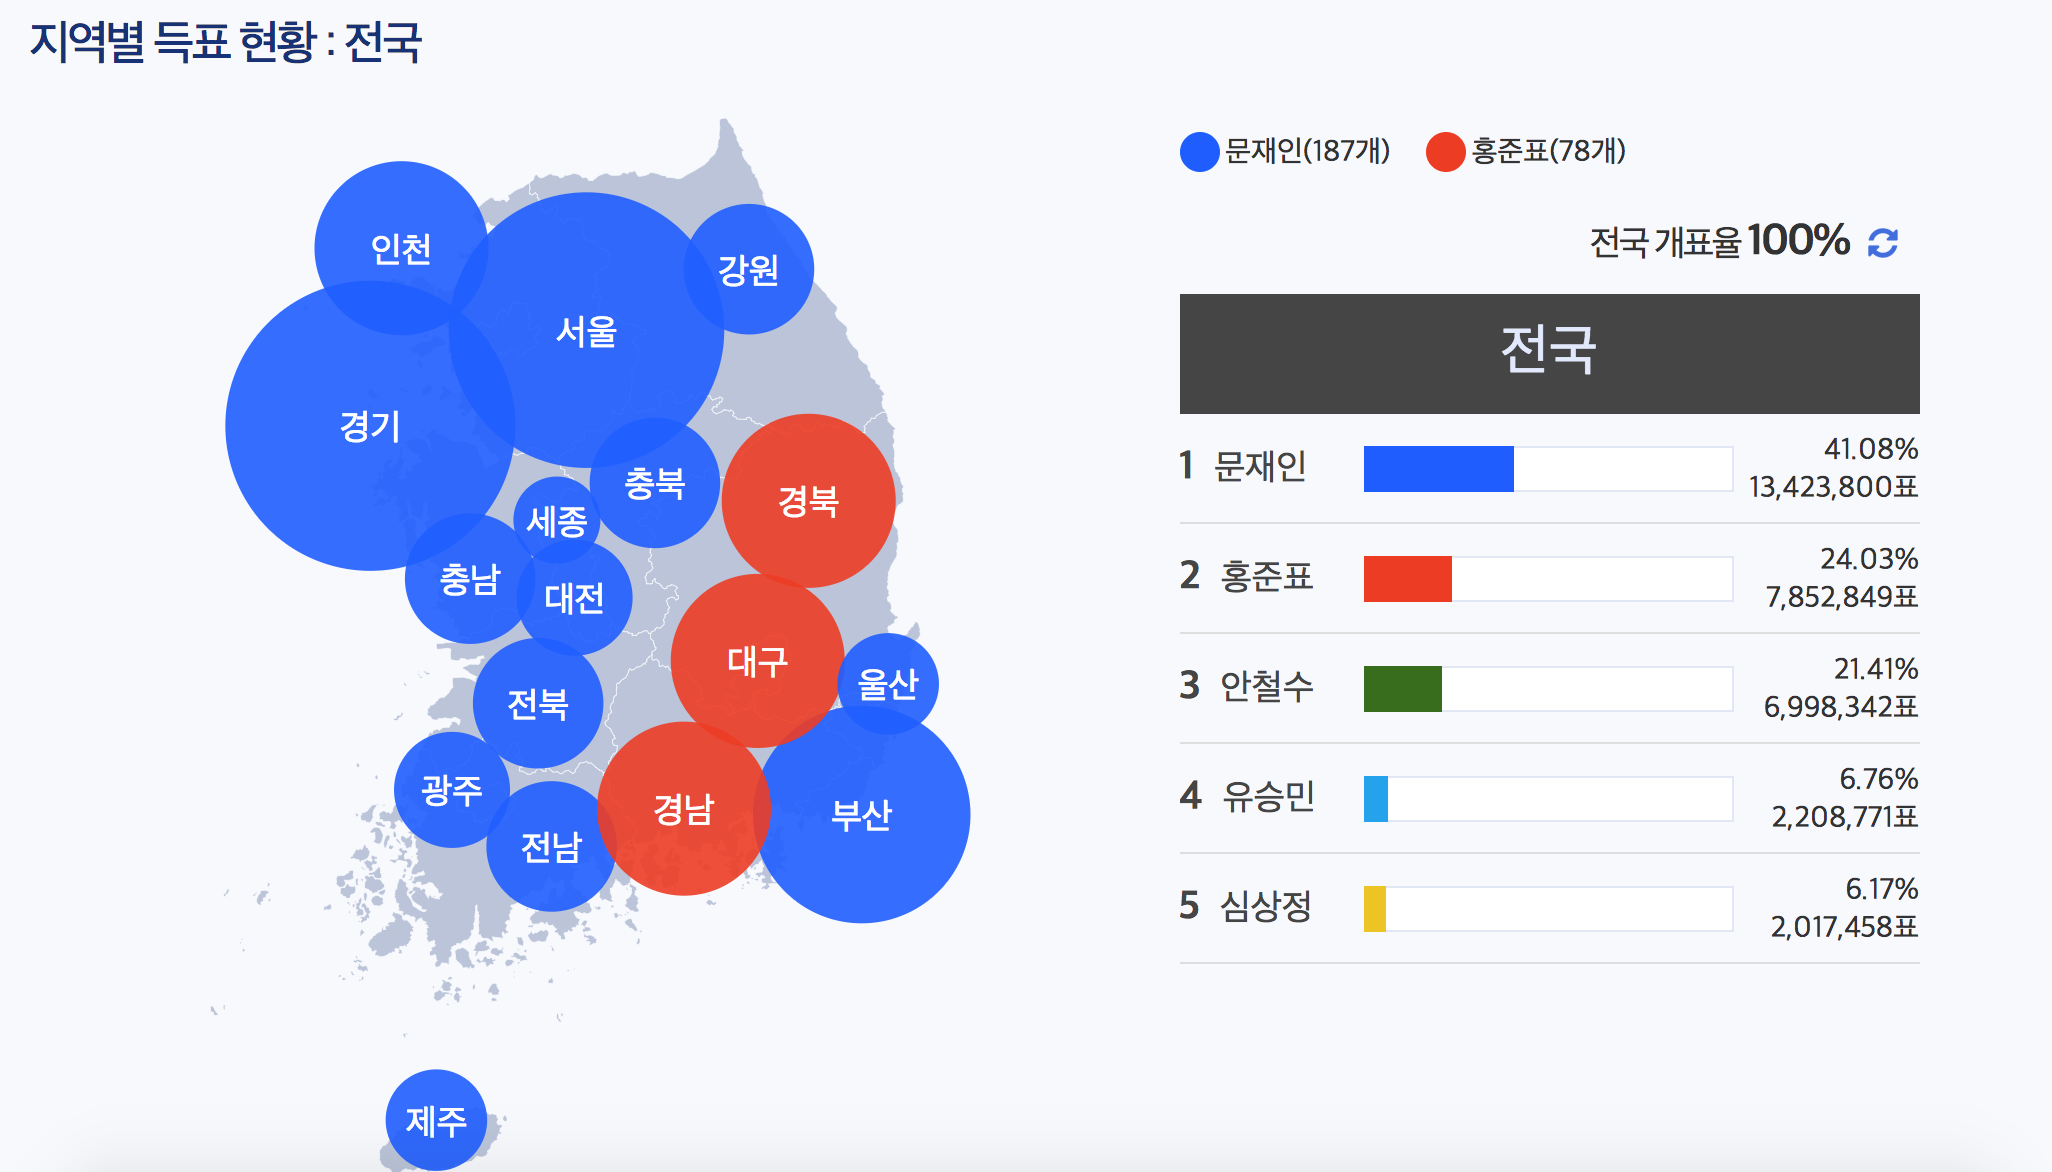 The electoral results of 2017 election is below. (Blue = Mun Jae-in, Red = Hong Jun-pyo) 